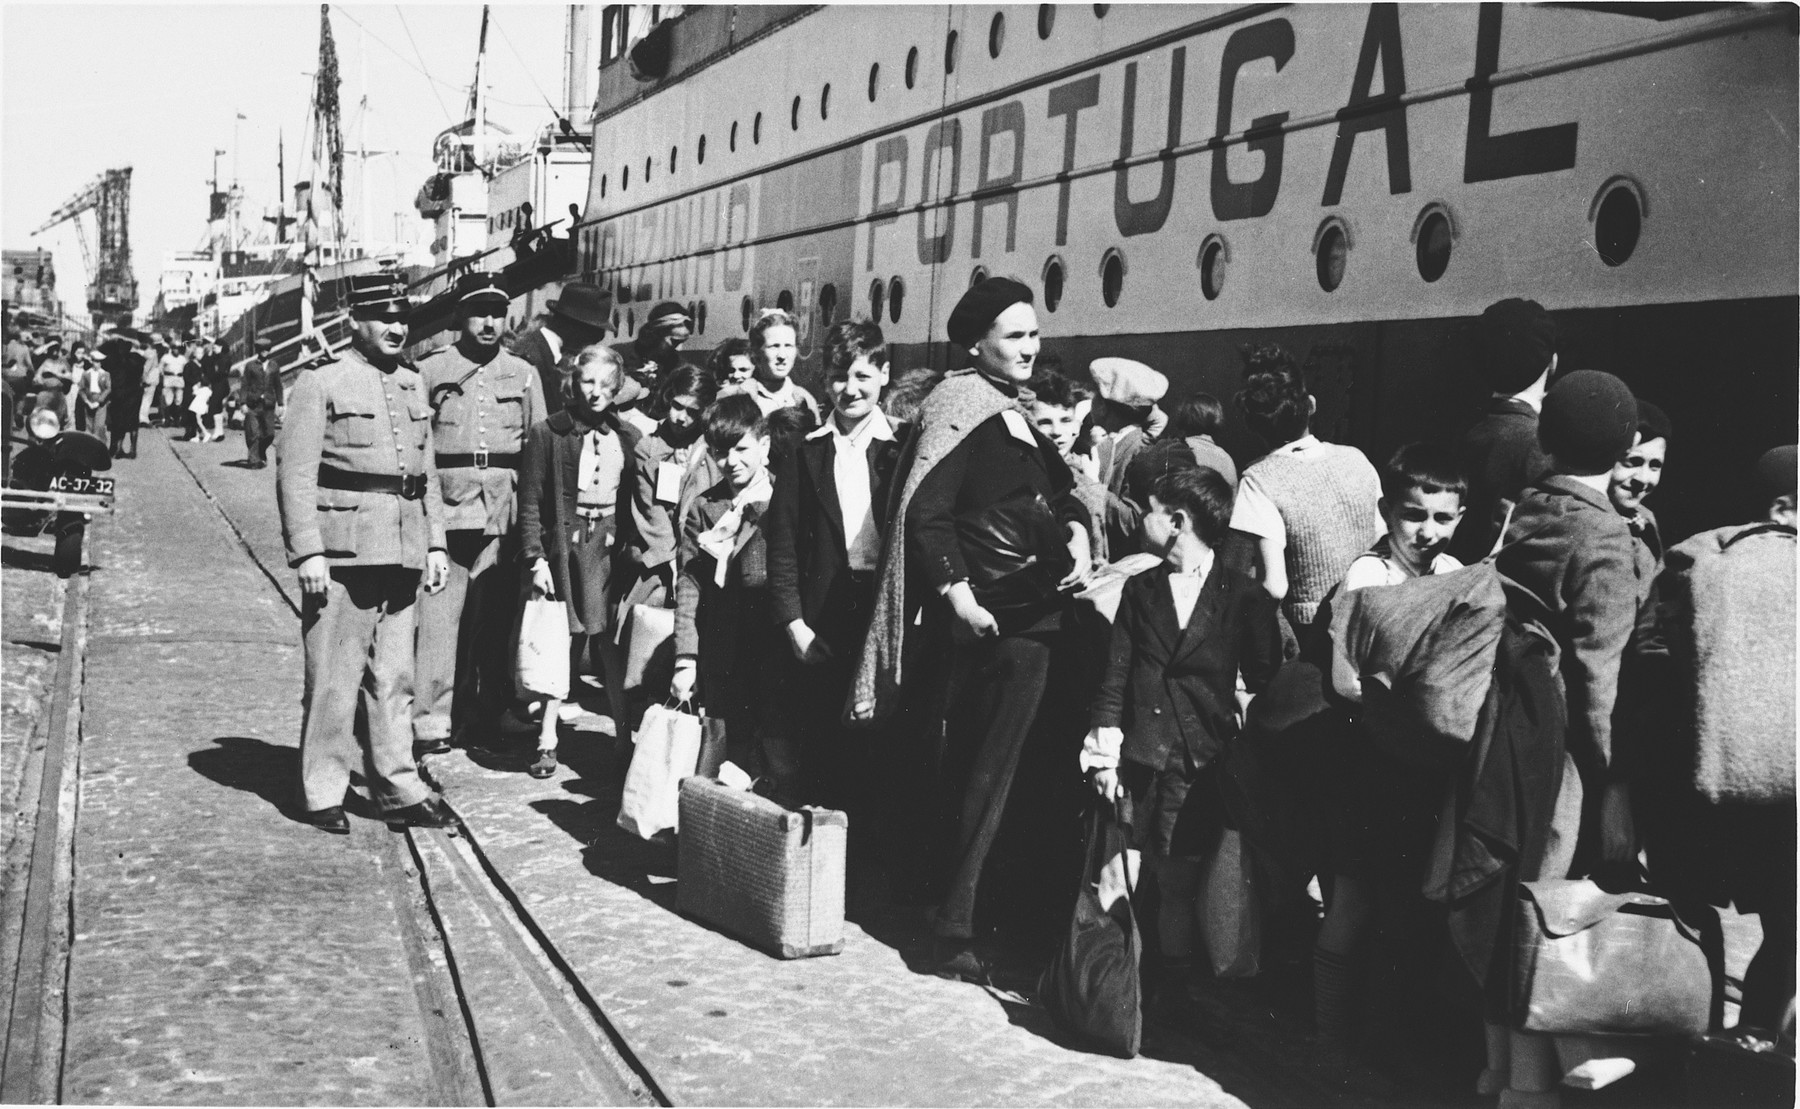 Two uniformed Portuguese policemen stand on the pier in the port of Lisbon as a group of Jewish refugee children wait in line to board the SS Mouzinho.

The young boy just to the right of center in the image, looking back over his right shoulder, is Herman Rosenfeld, born 27 April 1933 in Adelheim, Germany. 
The young blonde girl standing next to the two police officers is wearing tag #25, can be identified as Lilian Warschawski (or Warszawski), born 20 April 1930 in Belgium.